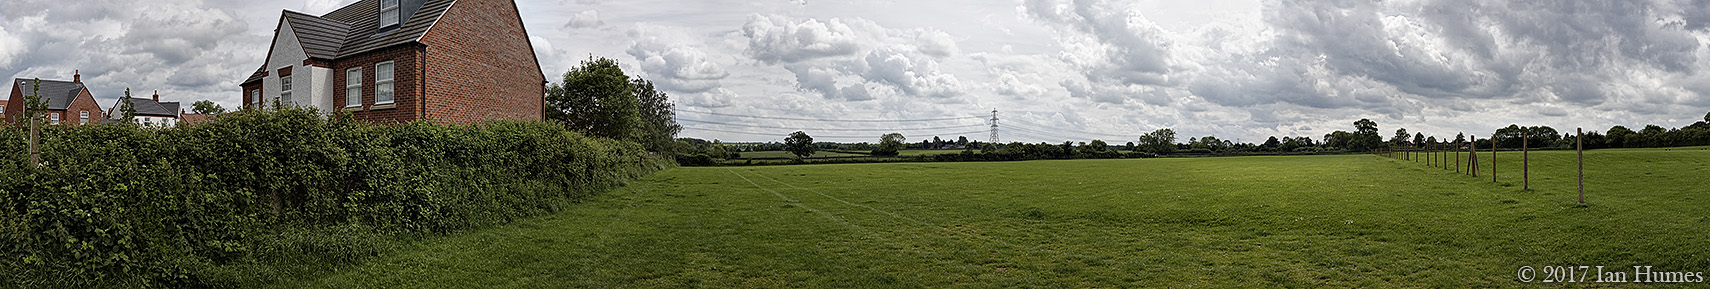 Playing fields - Burbage